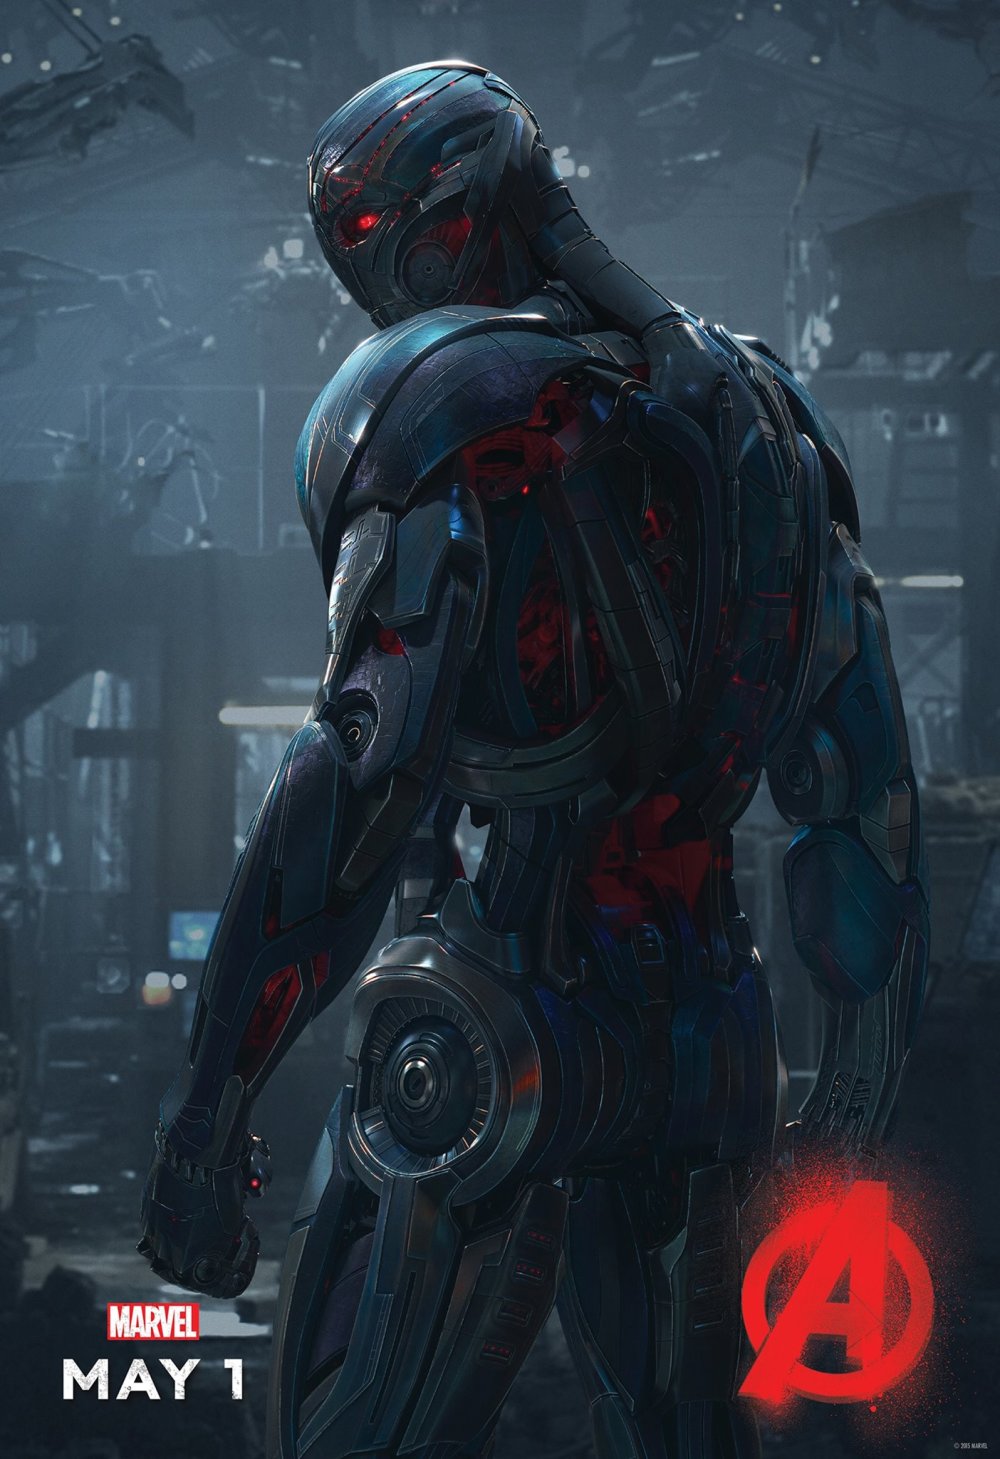 Ultron op poster 'Avengers: Age of Ultron'